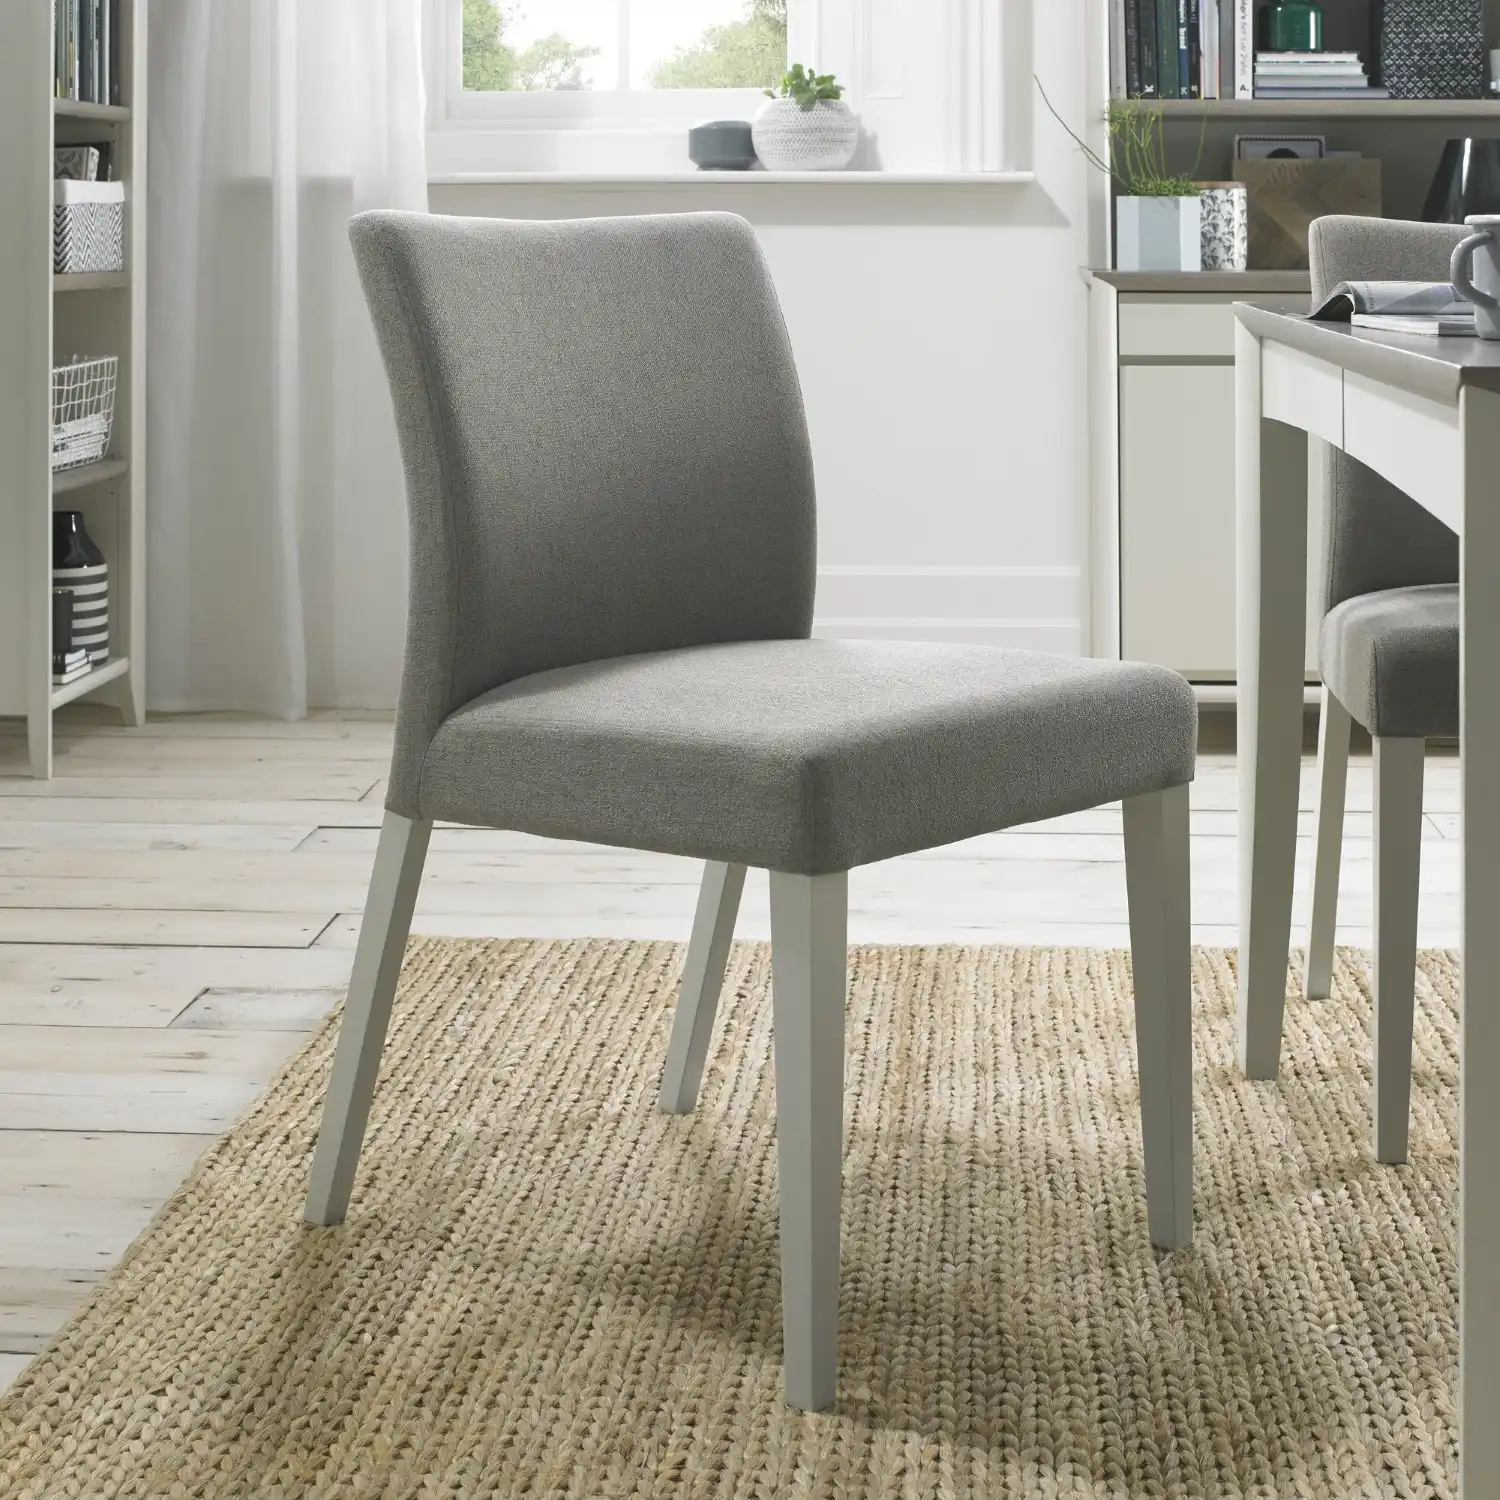 Pair of Low Back Dining Chairs Grey Fabric Grey Painted Legs